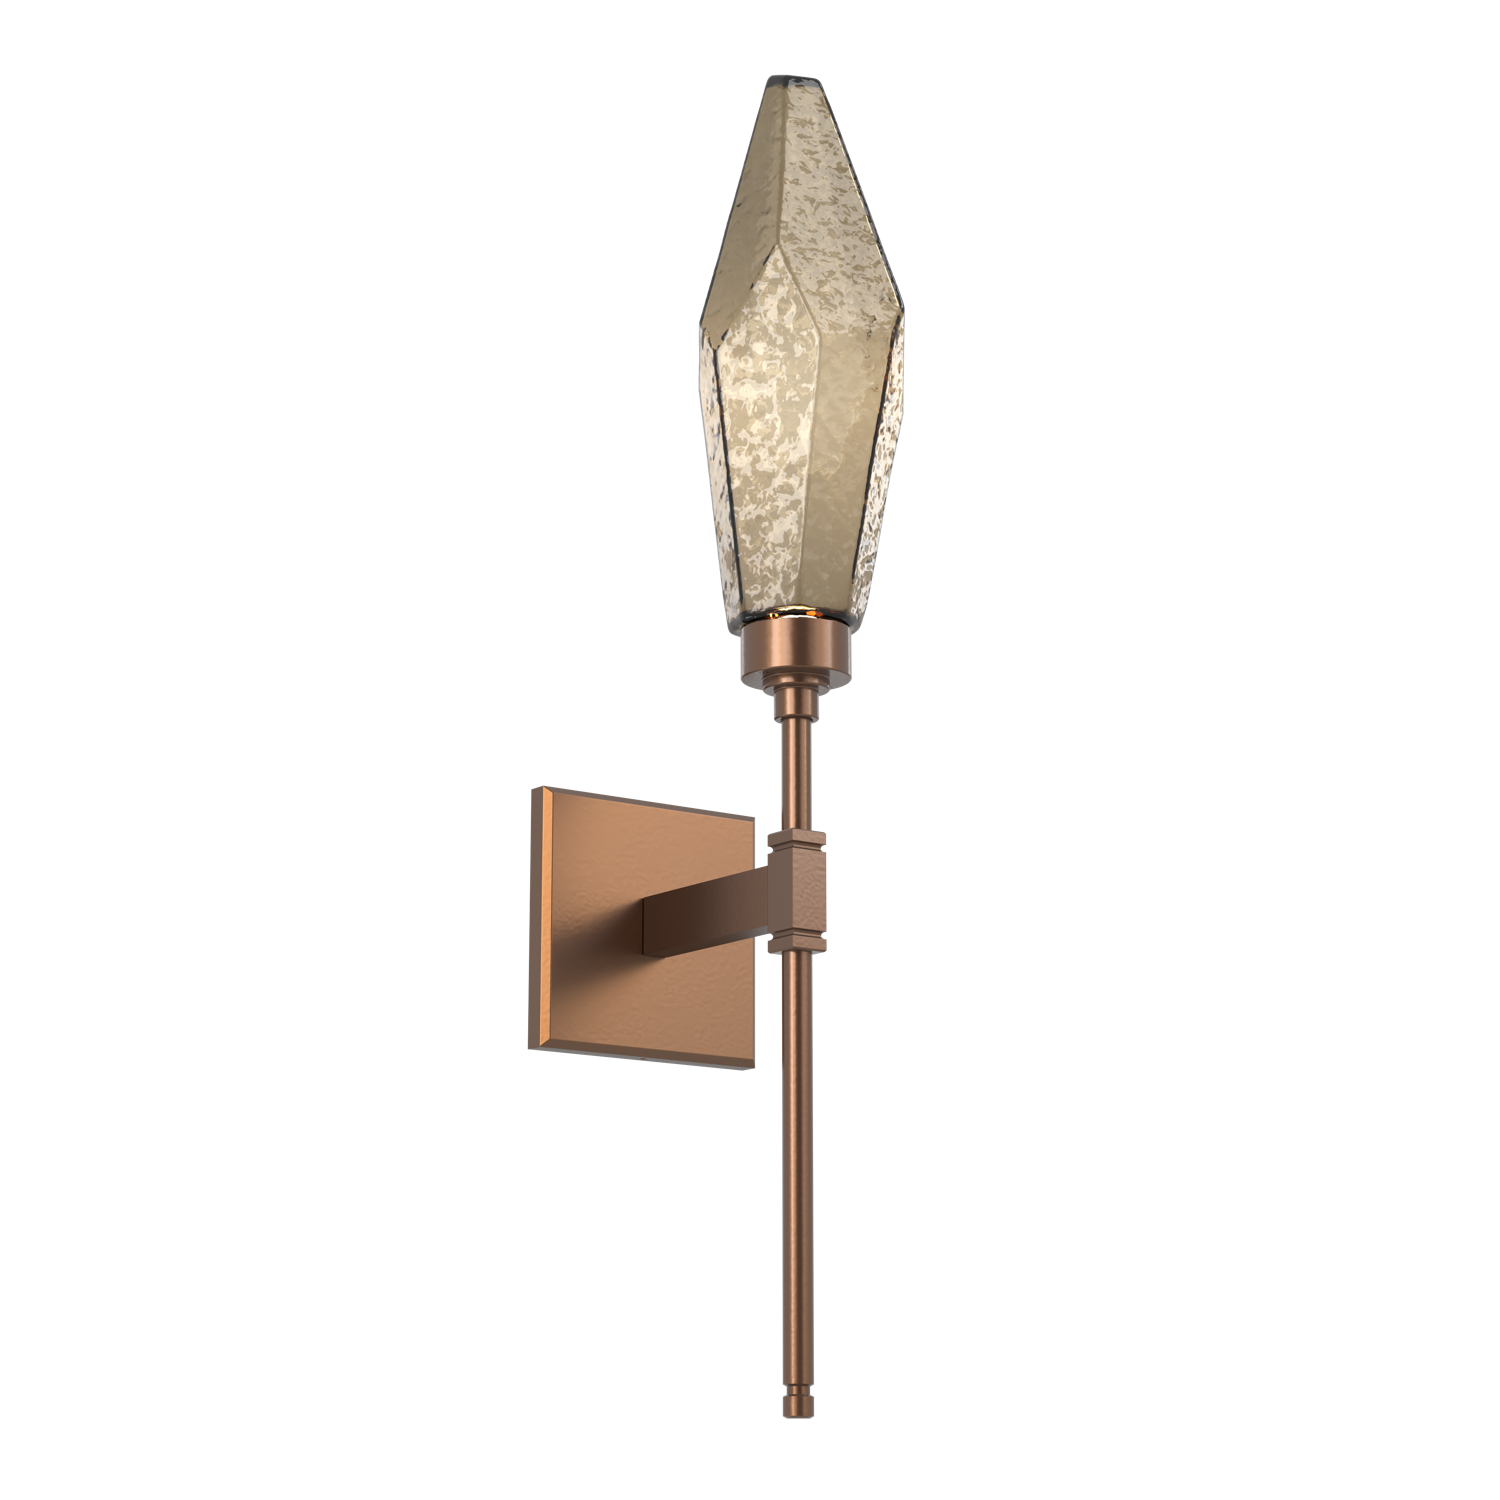 IDB0050-07-BB-CB-Hammerton-Studio-Rock-Crystal-belvedere-wall-sconce-with-burnished-bronze-finish-and-chilled-bronze-blown-glass-shades-and-LED-lamping